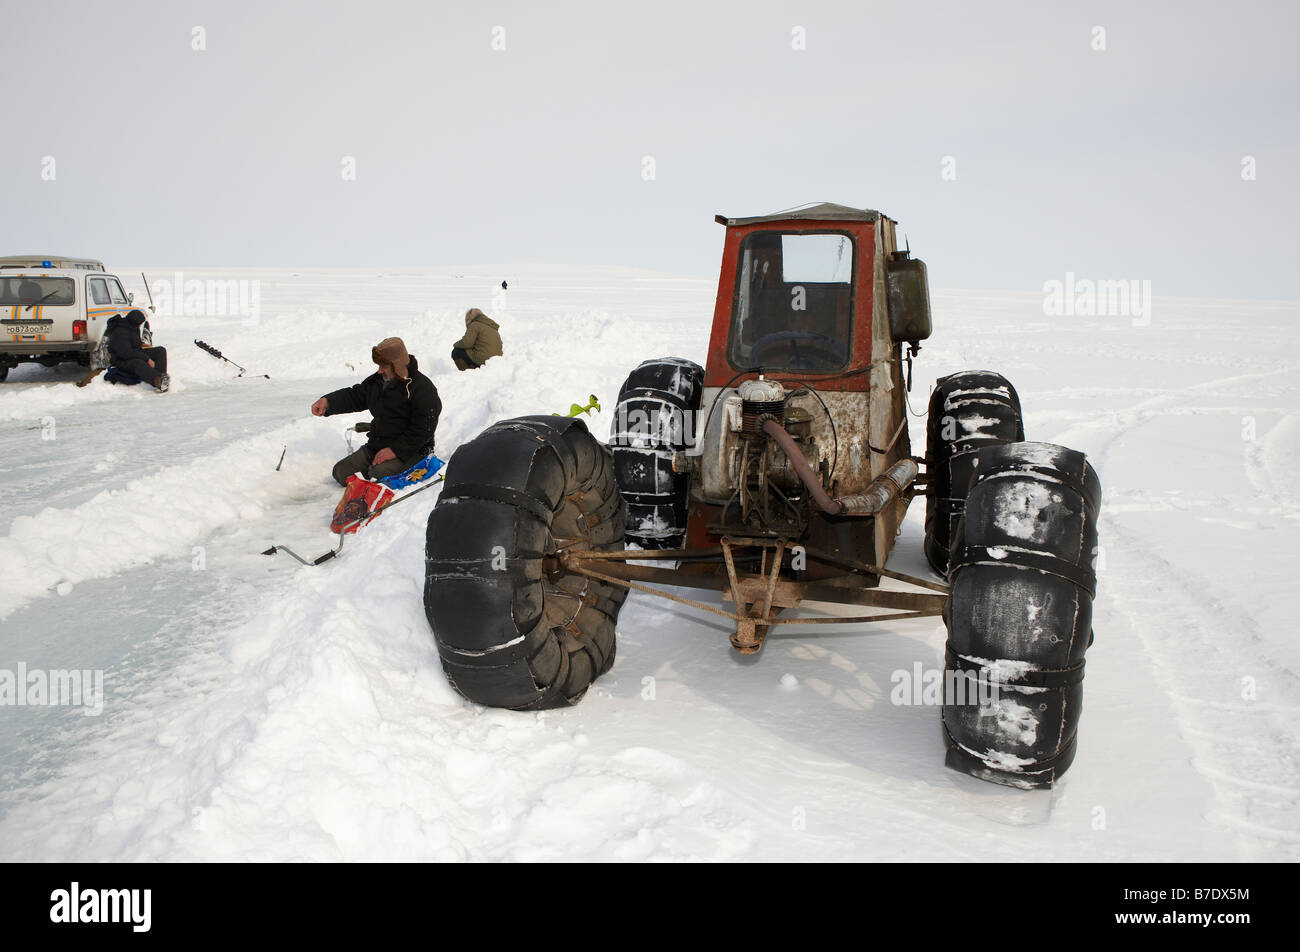 Ice fishing for smelts by homemade 4 wheeler vehicle, Anadyr Chukotka,  Siberia Russia Stock Photo - Alamy